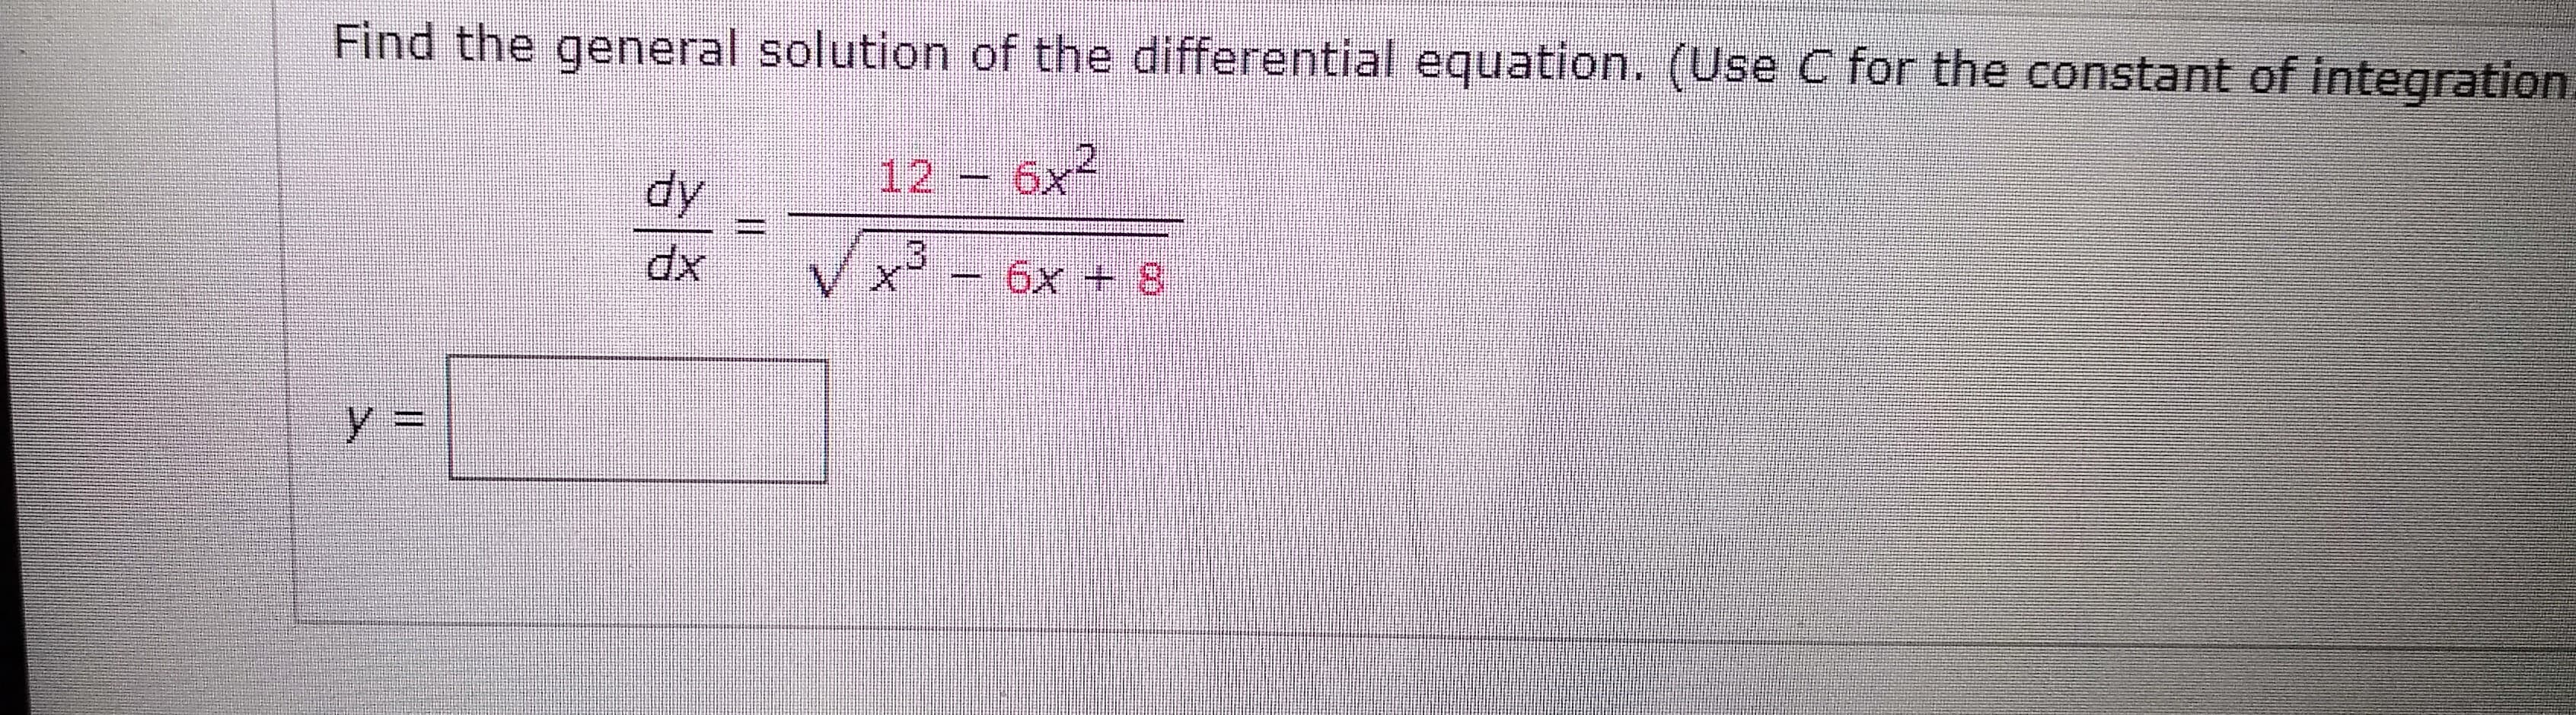 Find the general solution of the differential equation. (Use C for the constant of integration.
dy
12 6x2
6x + 8
